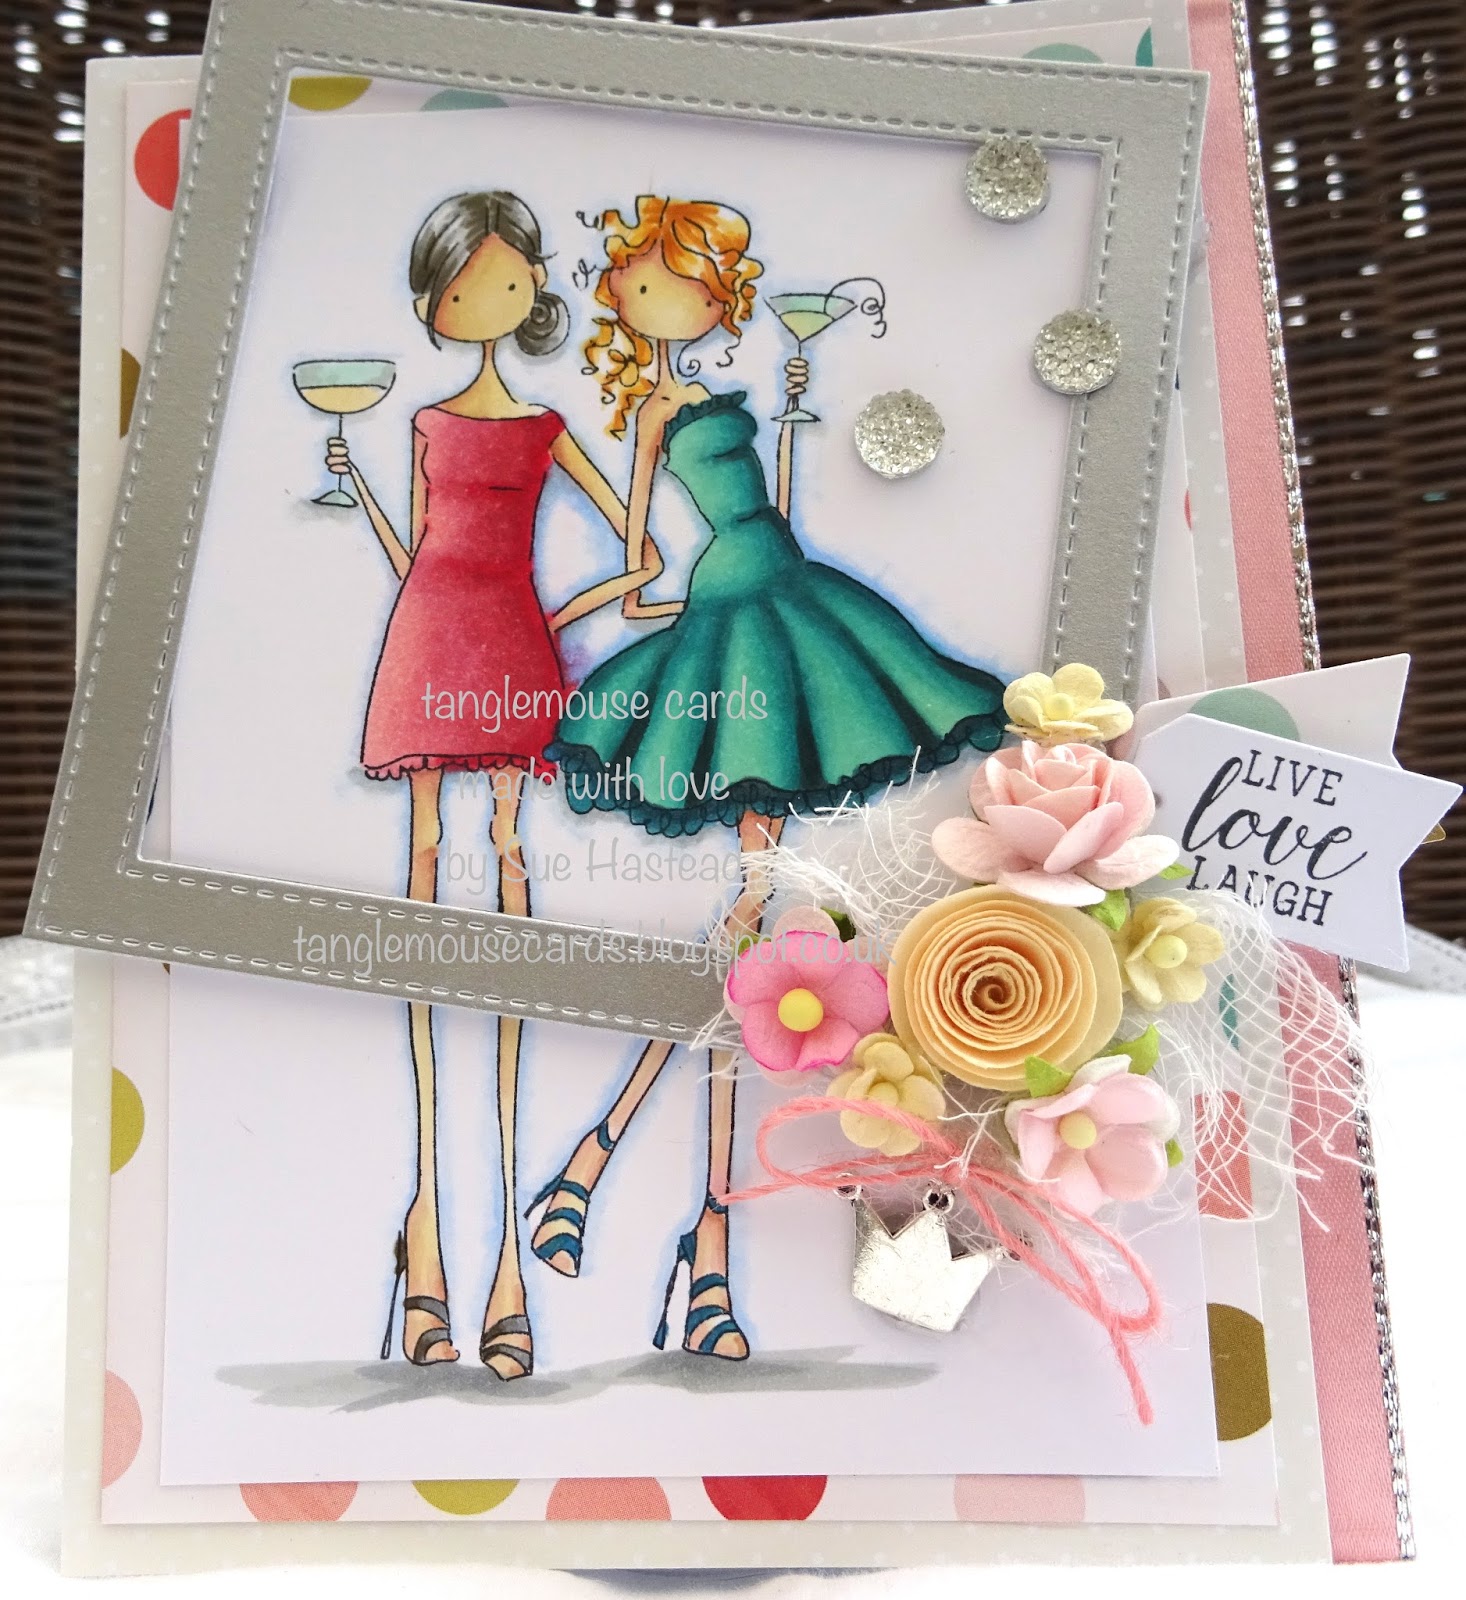 Spotted On Sunday at Stamping Bella - Sue Hastead's Uptown Girls Victoria & Juliette Card